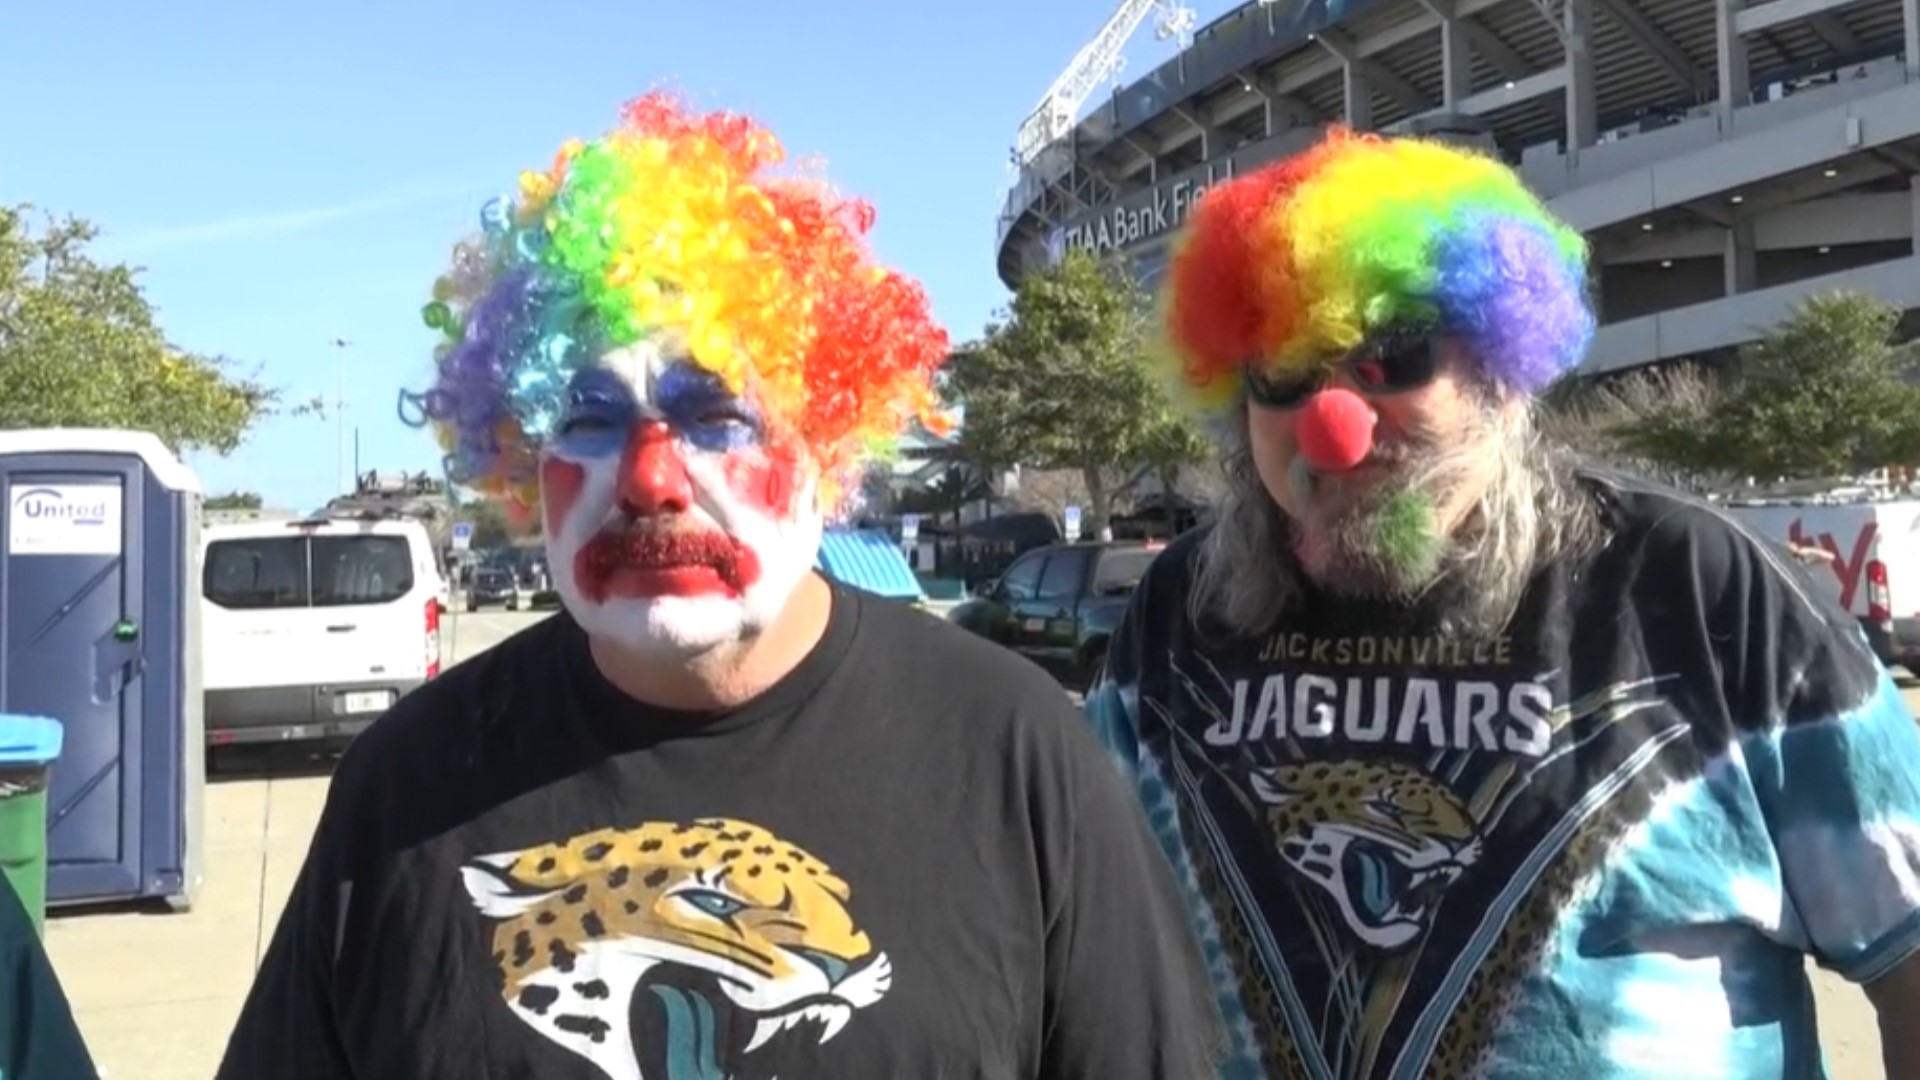 Jaguars fans show their displeasure with team management by dressing up as clowns before the final game of the season.